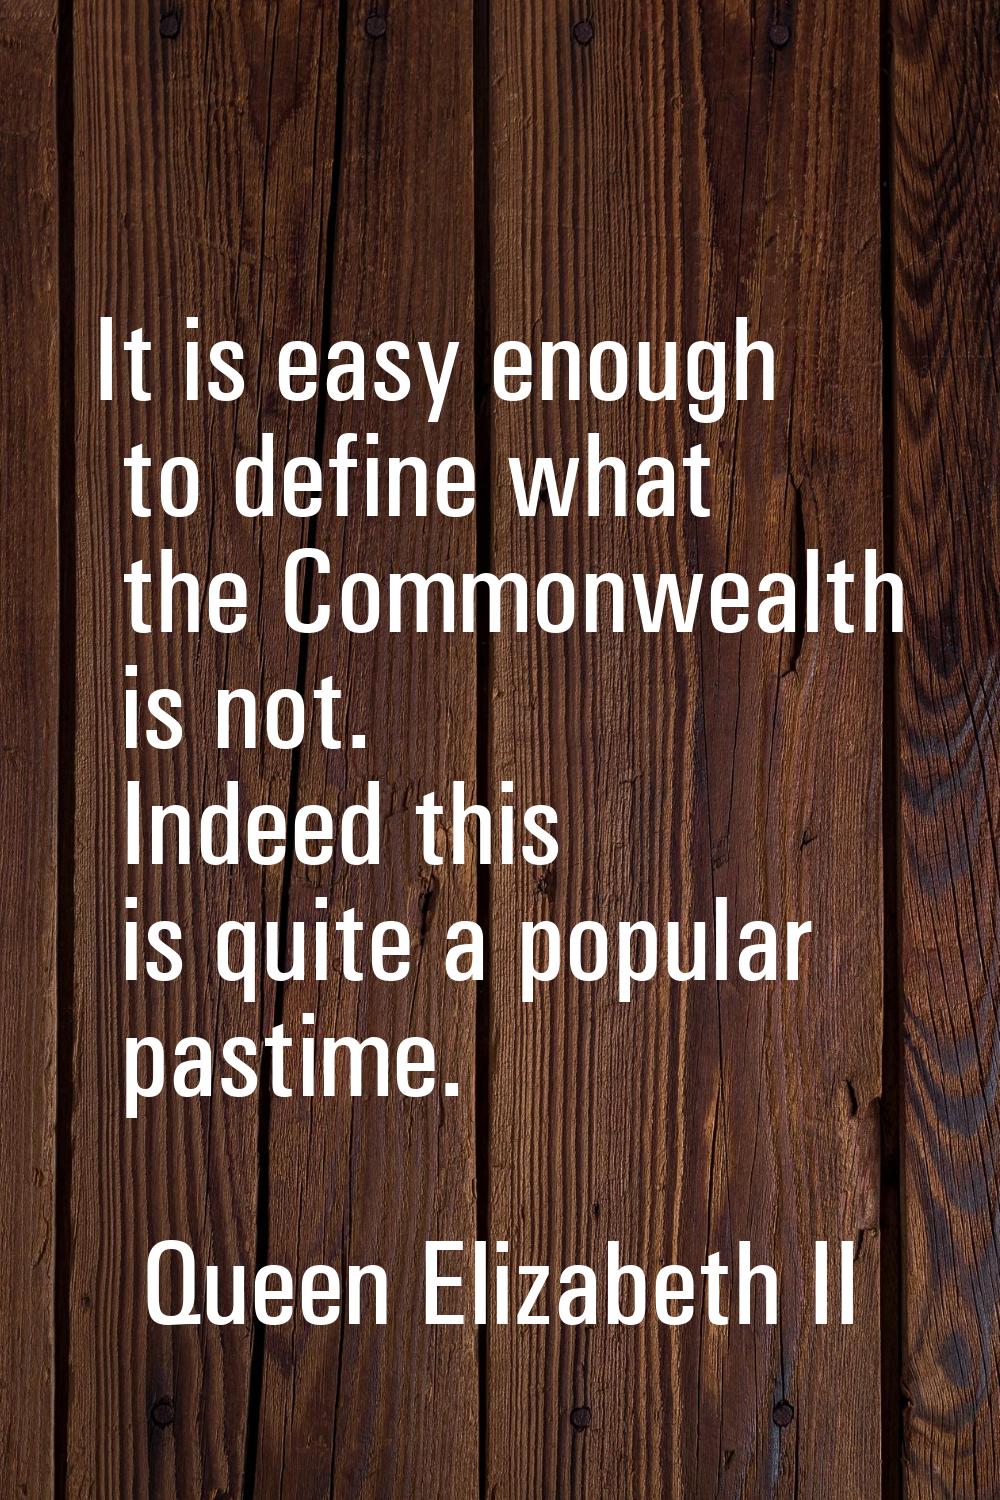 It is easy enough to define what the Commonwealth is not. Indeed this is quite a popular pastime.